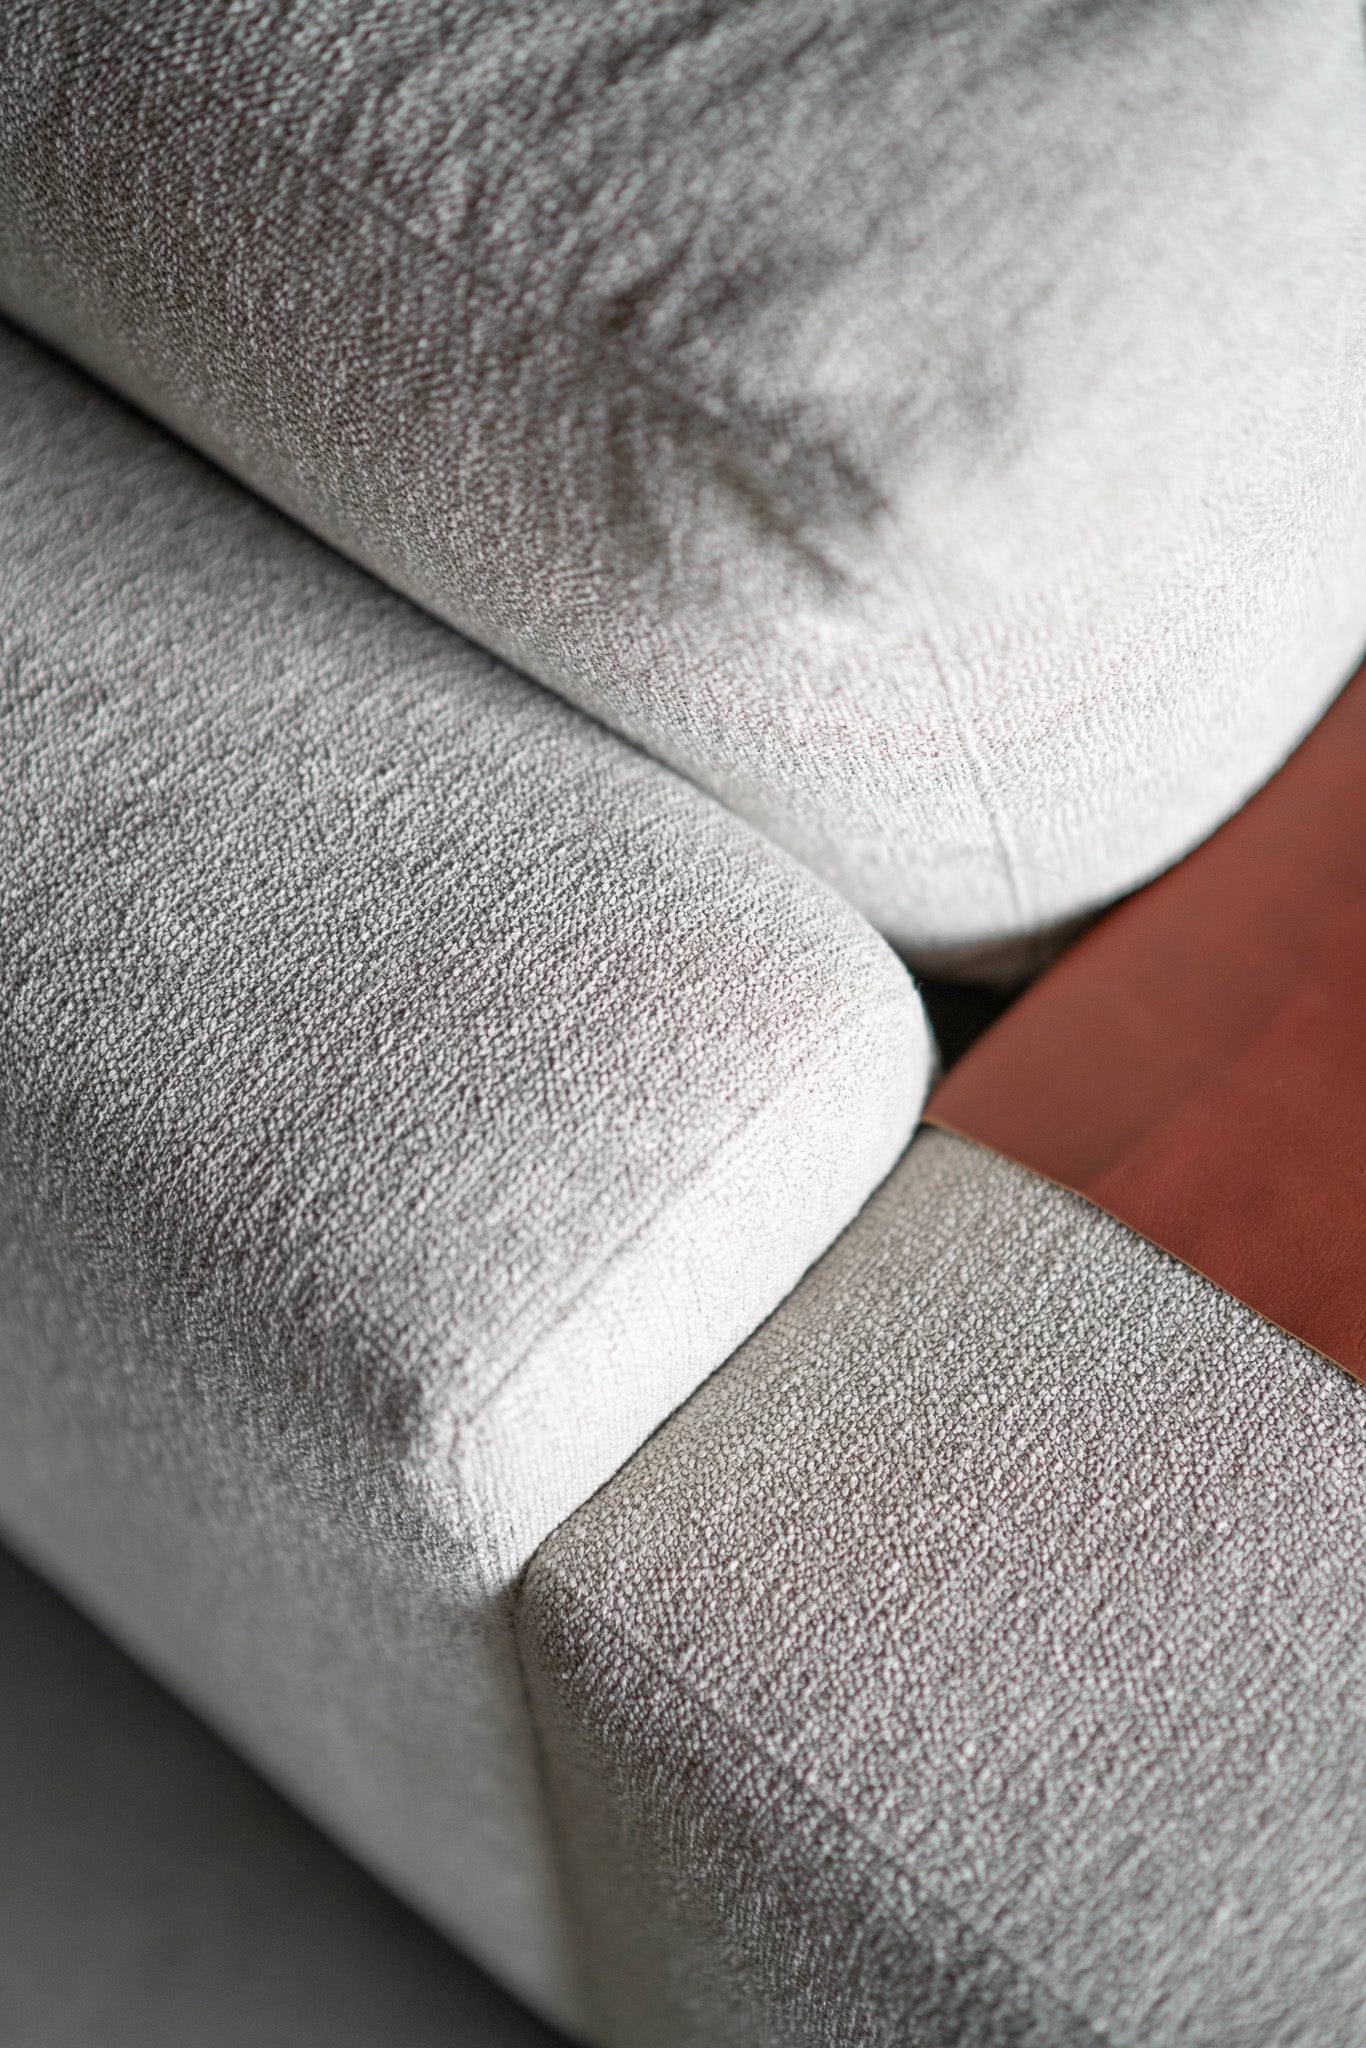 close up shot of sofa with leather arm 